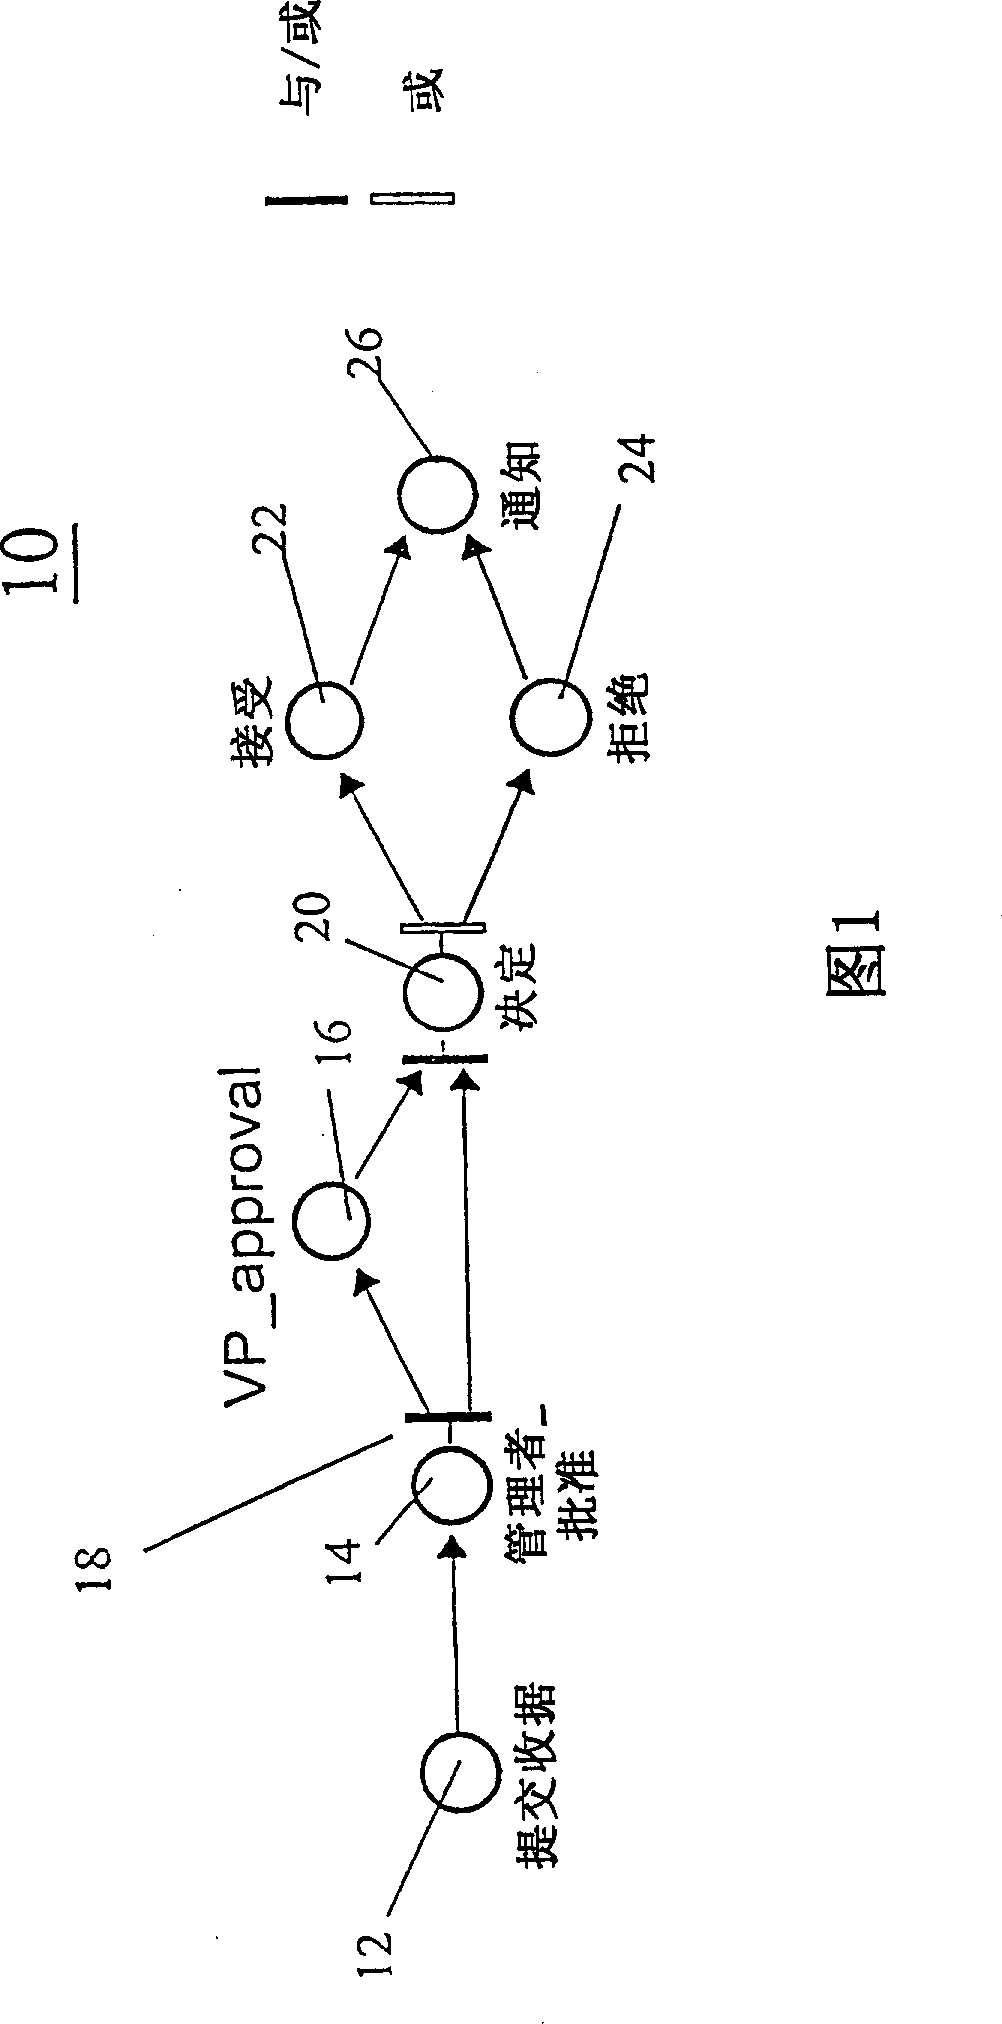 Dynamic organization model and management computing system and method thereof